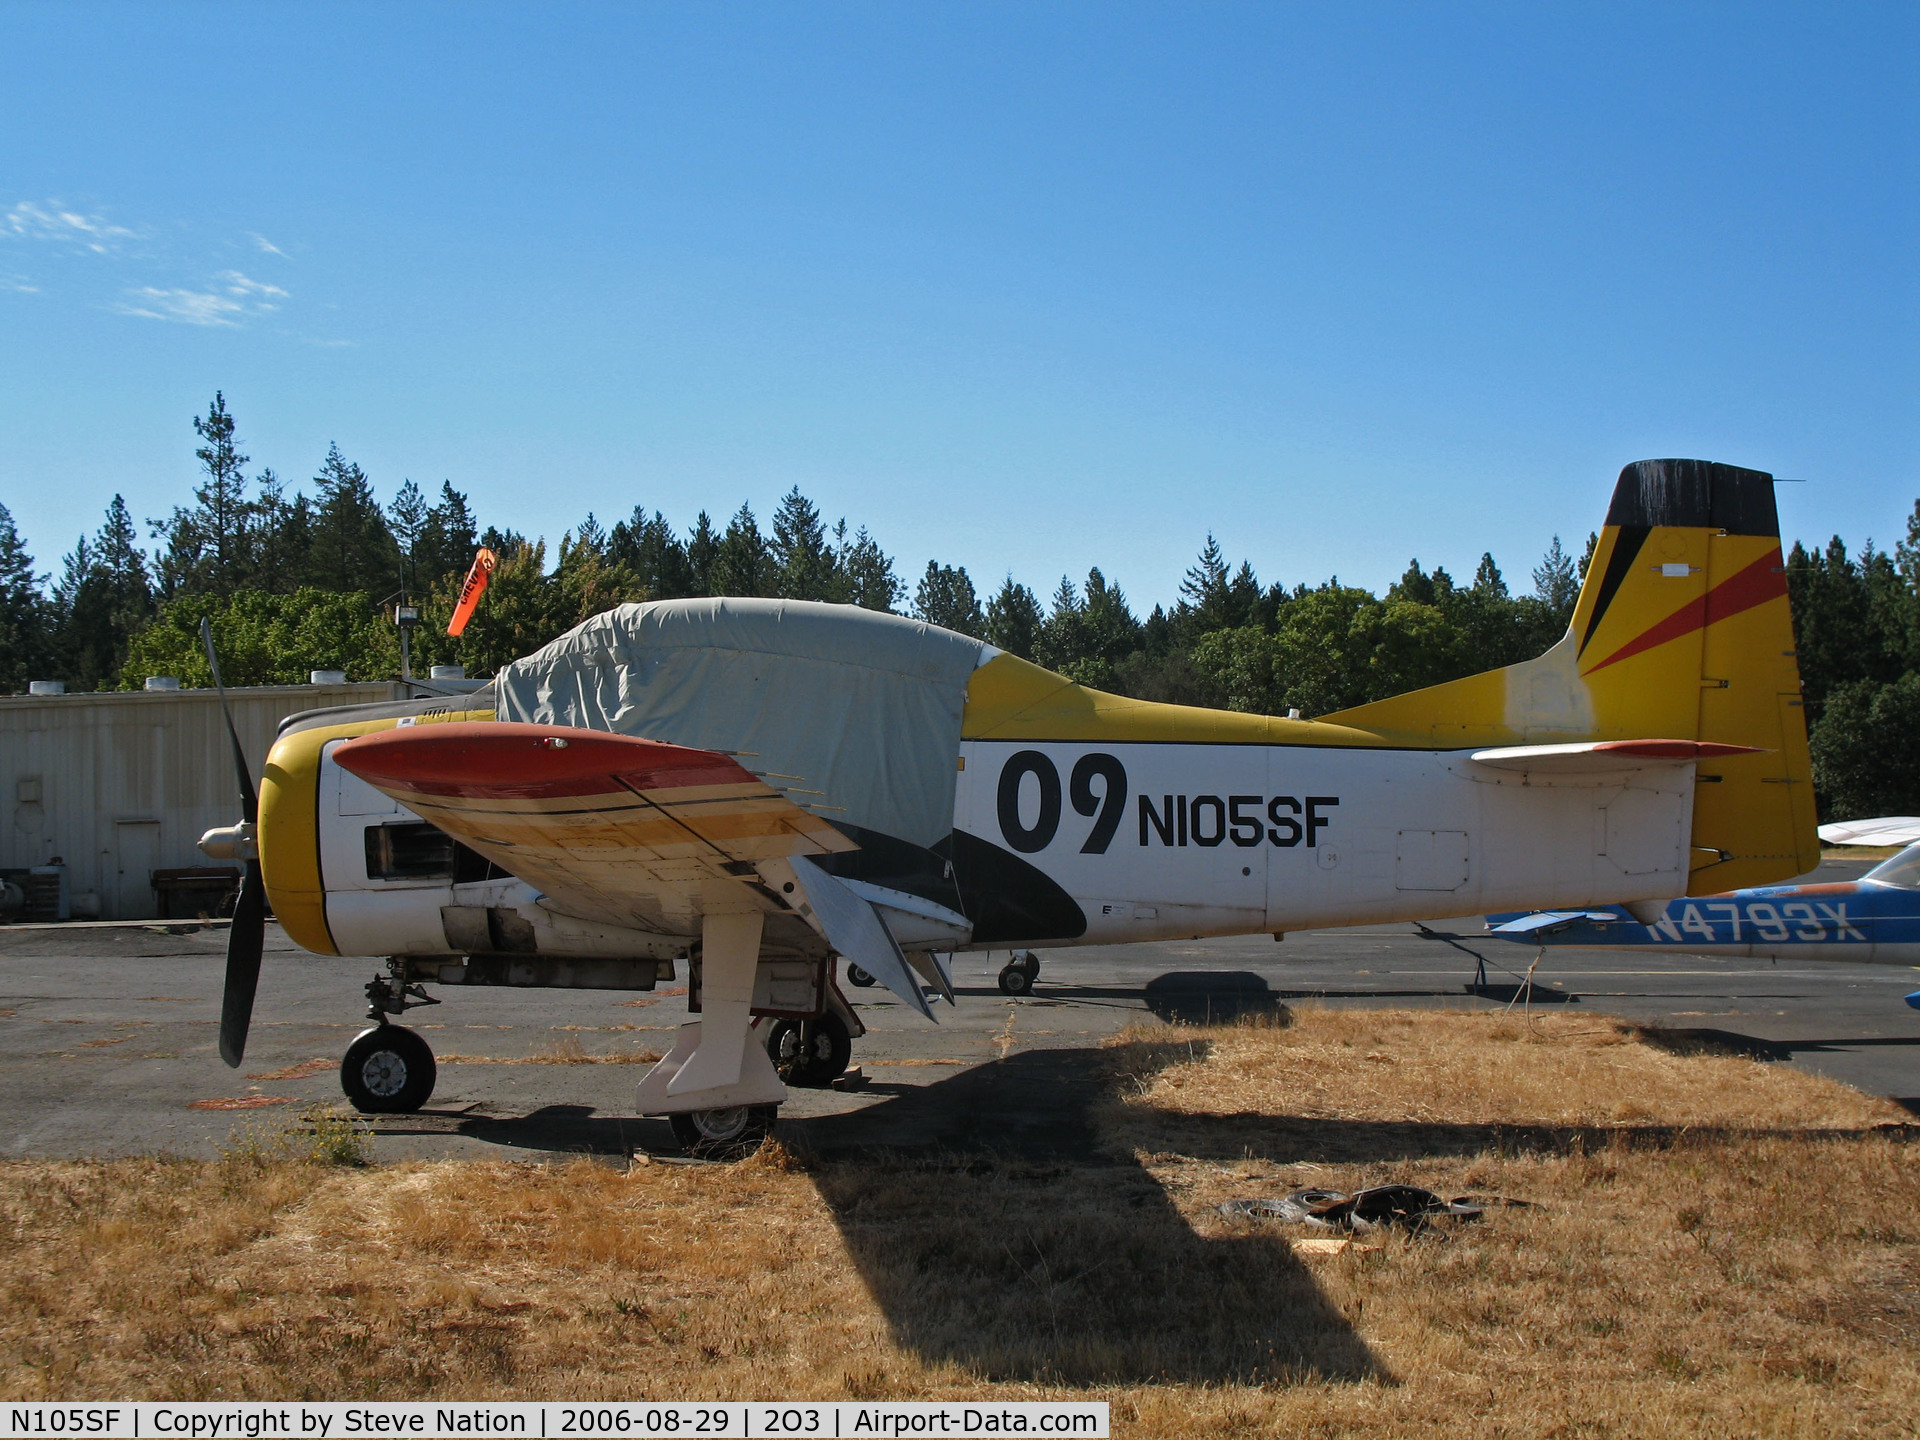 N105SF, North American T-28B Trojan C/N 200-412 (138341), North American T-28B with canopy cover and race # 09 @ Parrett Field, Angwin, CA (with owner in Jean, NV by Aug 2009)